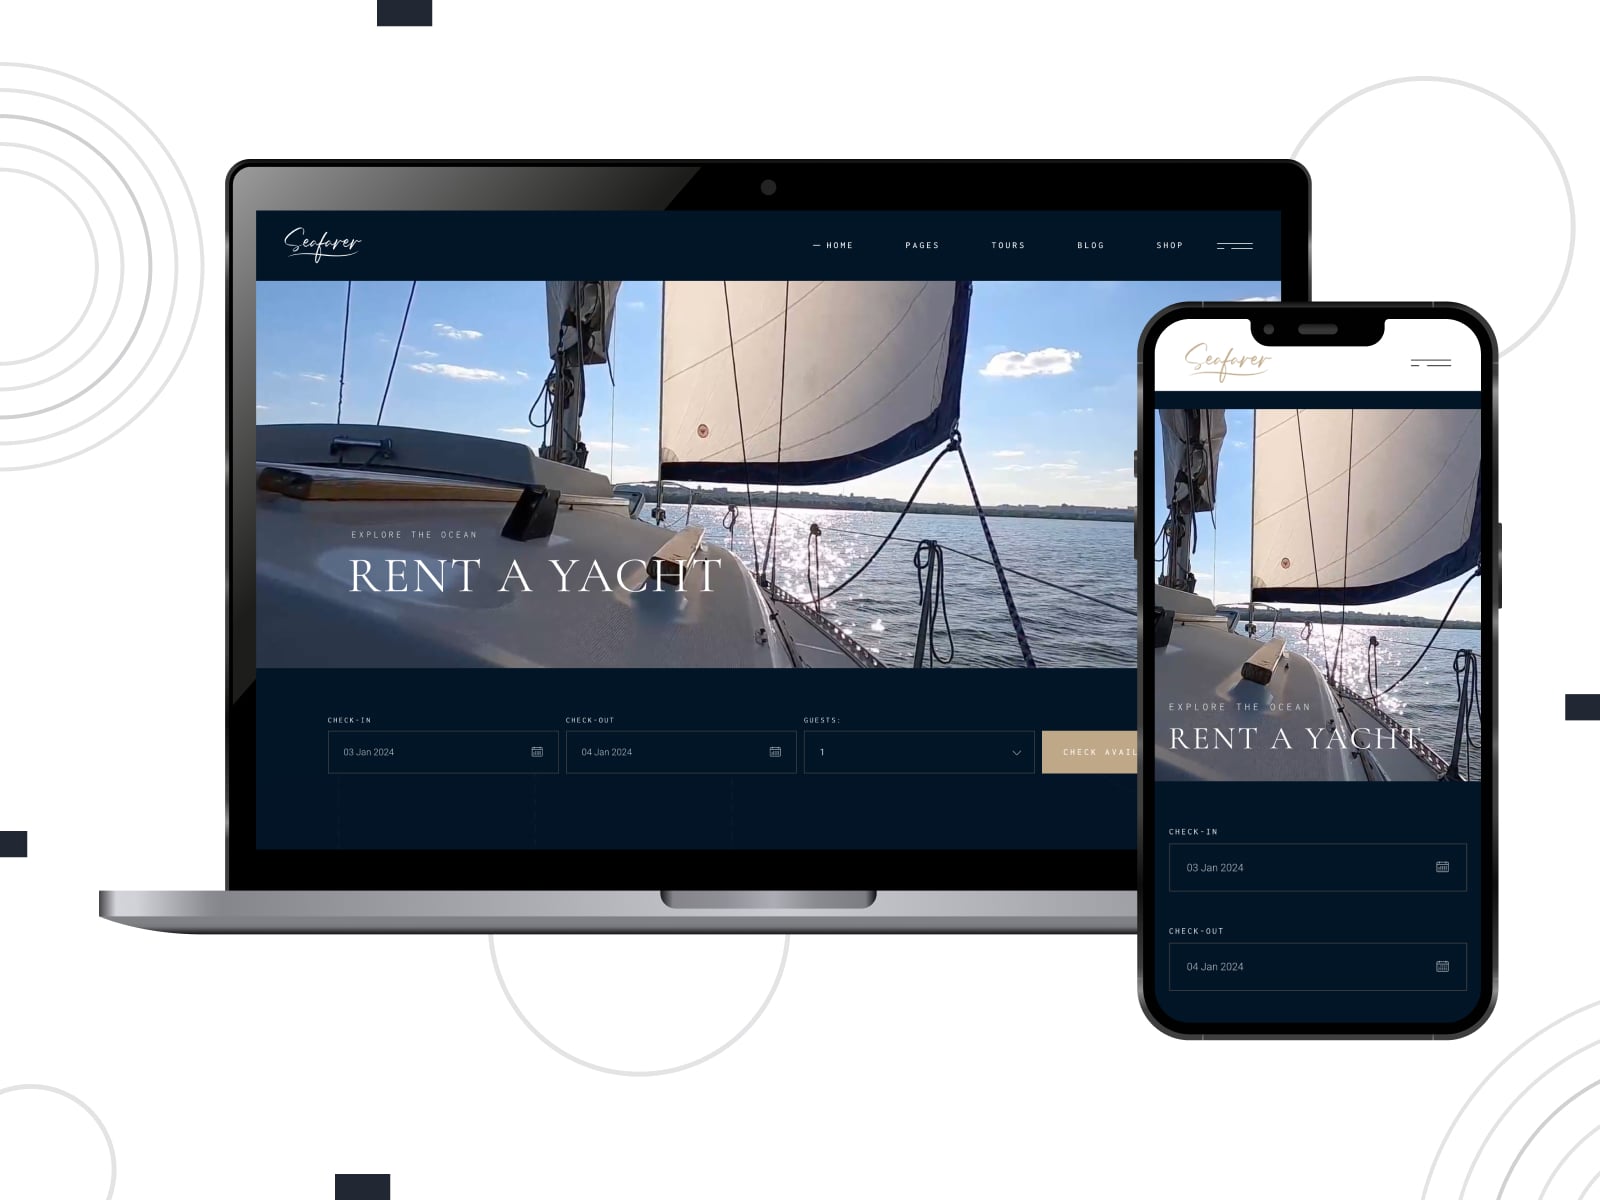 Collage of the Seafarer boat rental WordPress themes demo page on mobile and desktop screens.